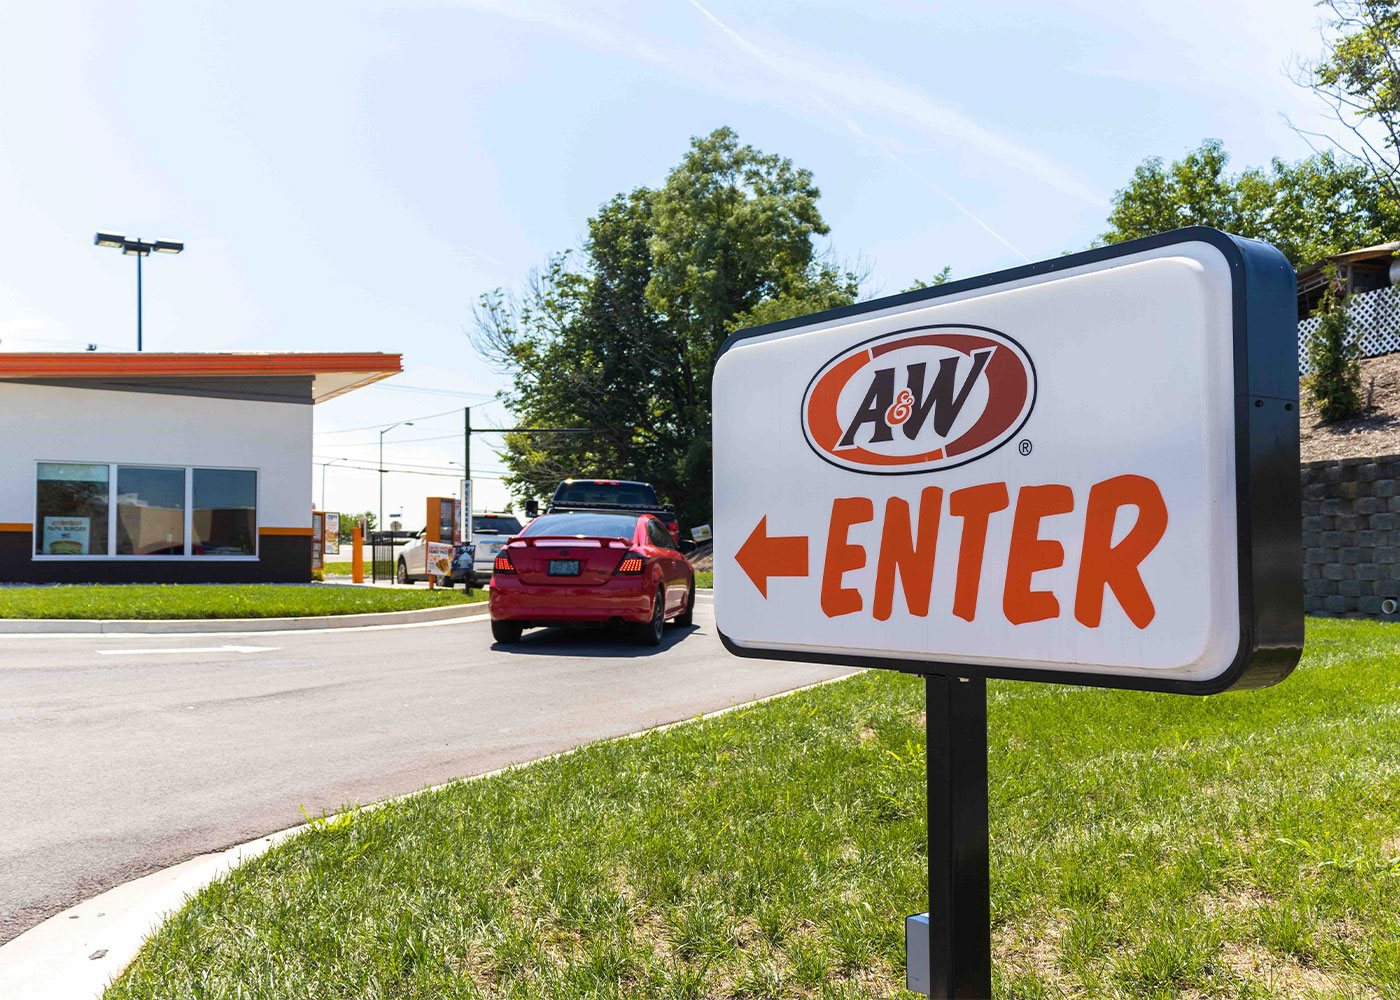 Exterior of A&W Restaurant in Richmond, Kentucky. Cars in drive-thru are out of focus with a sign that says 